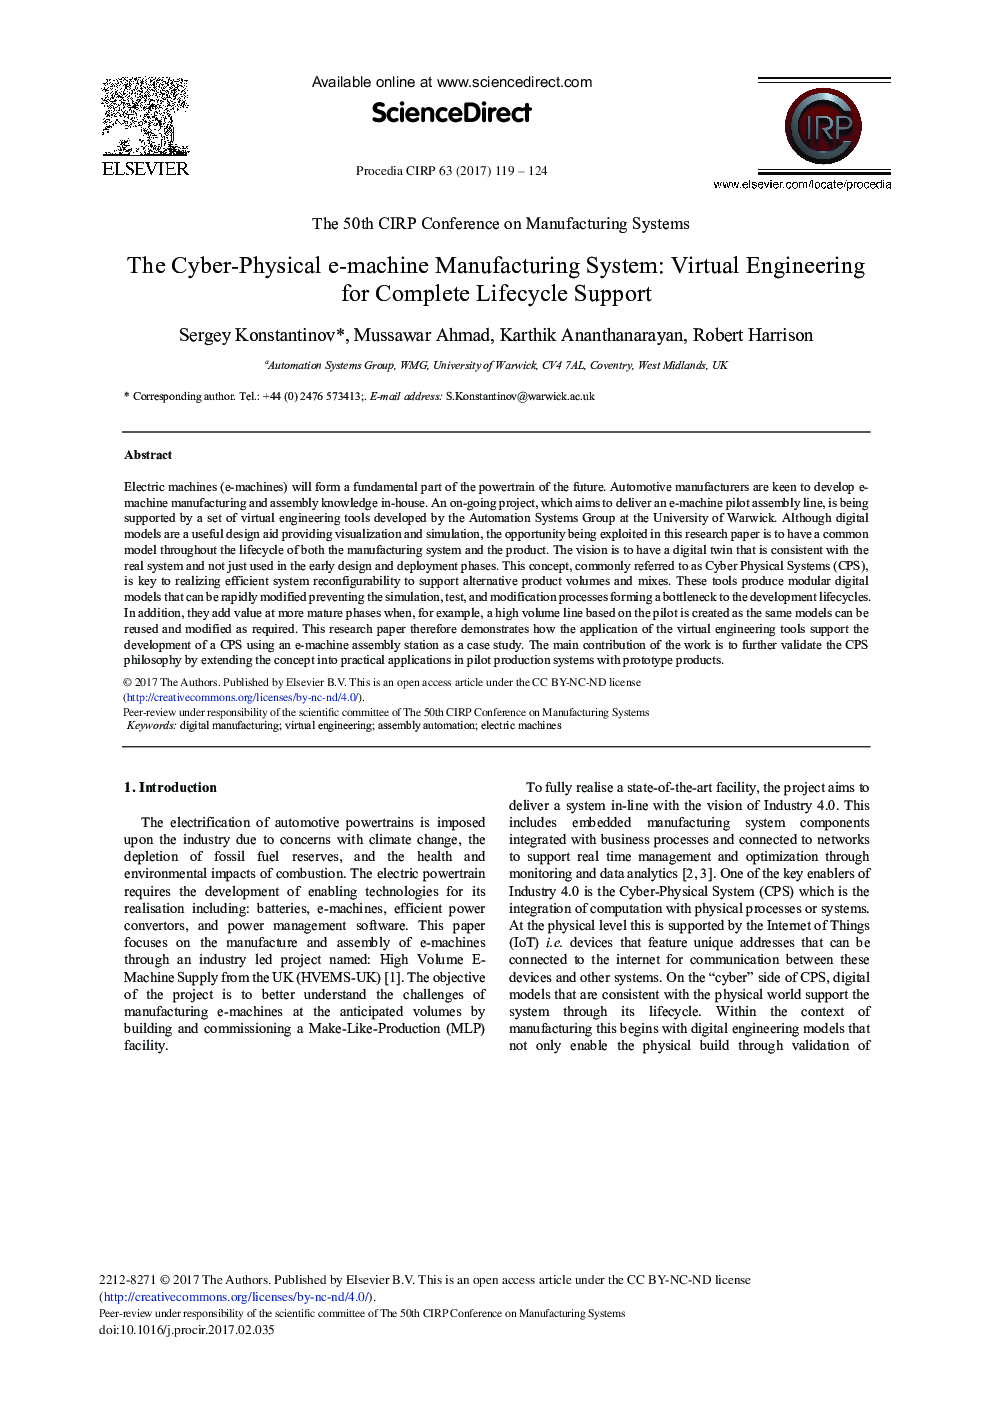 The Cyber-physical E-machine Manufacturing System: Virtual Engineering for Complete Lifecycle Support